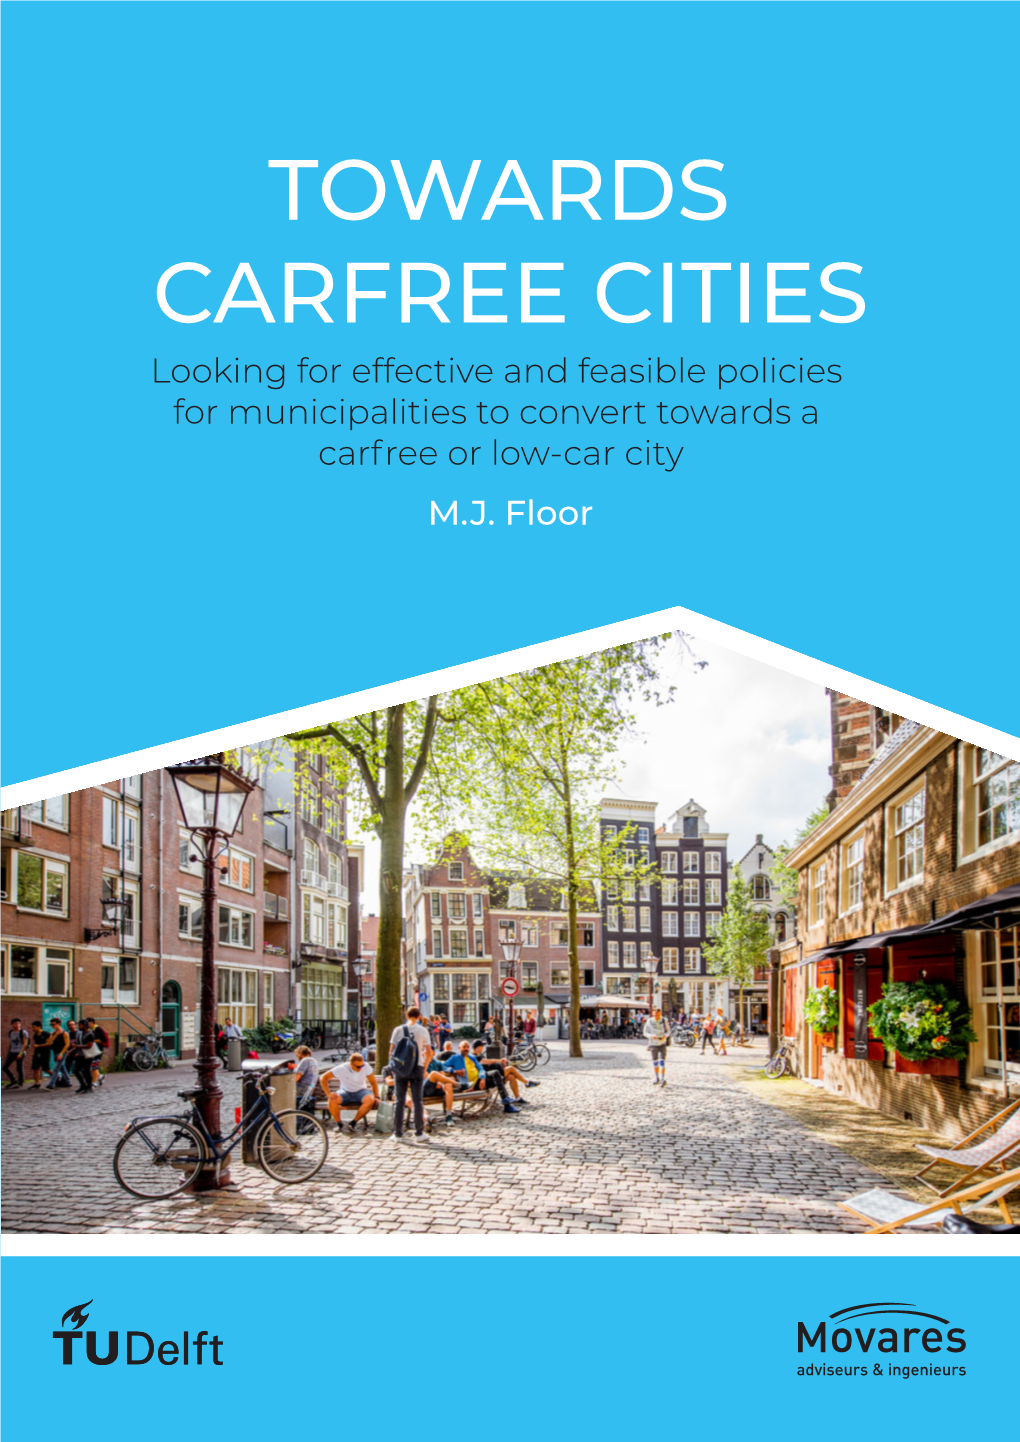 TOWARDS CARFREE CITIES Looking for Effective and Feasible Policies for Municipalities to Convert Towards a Carfree Or Low-Car City M.J